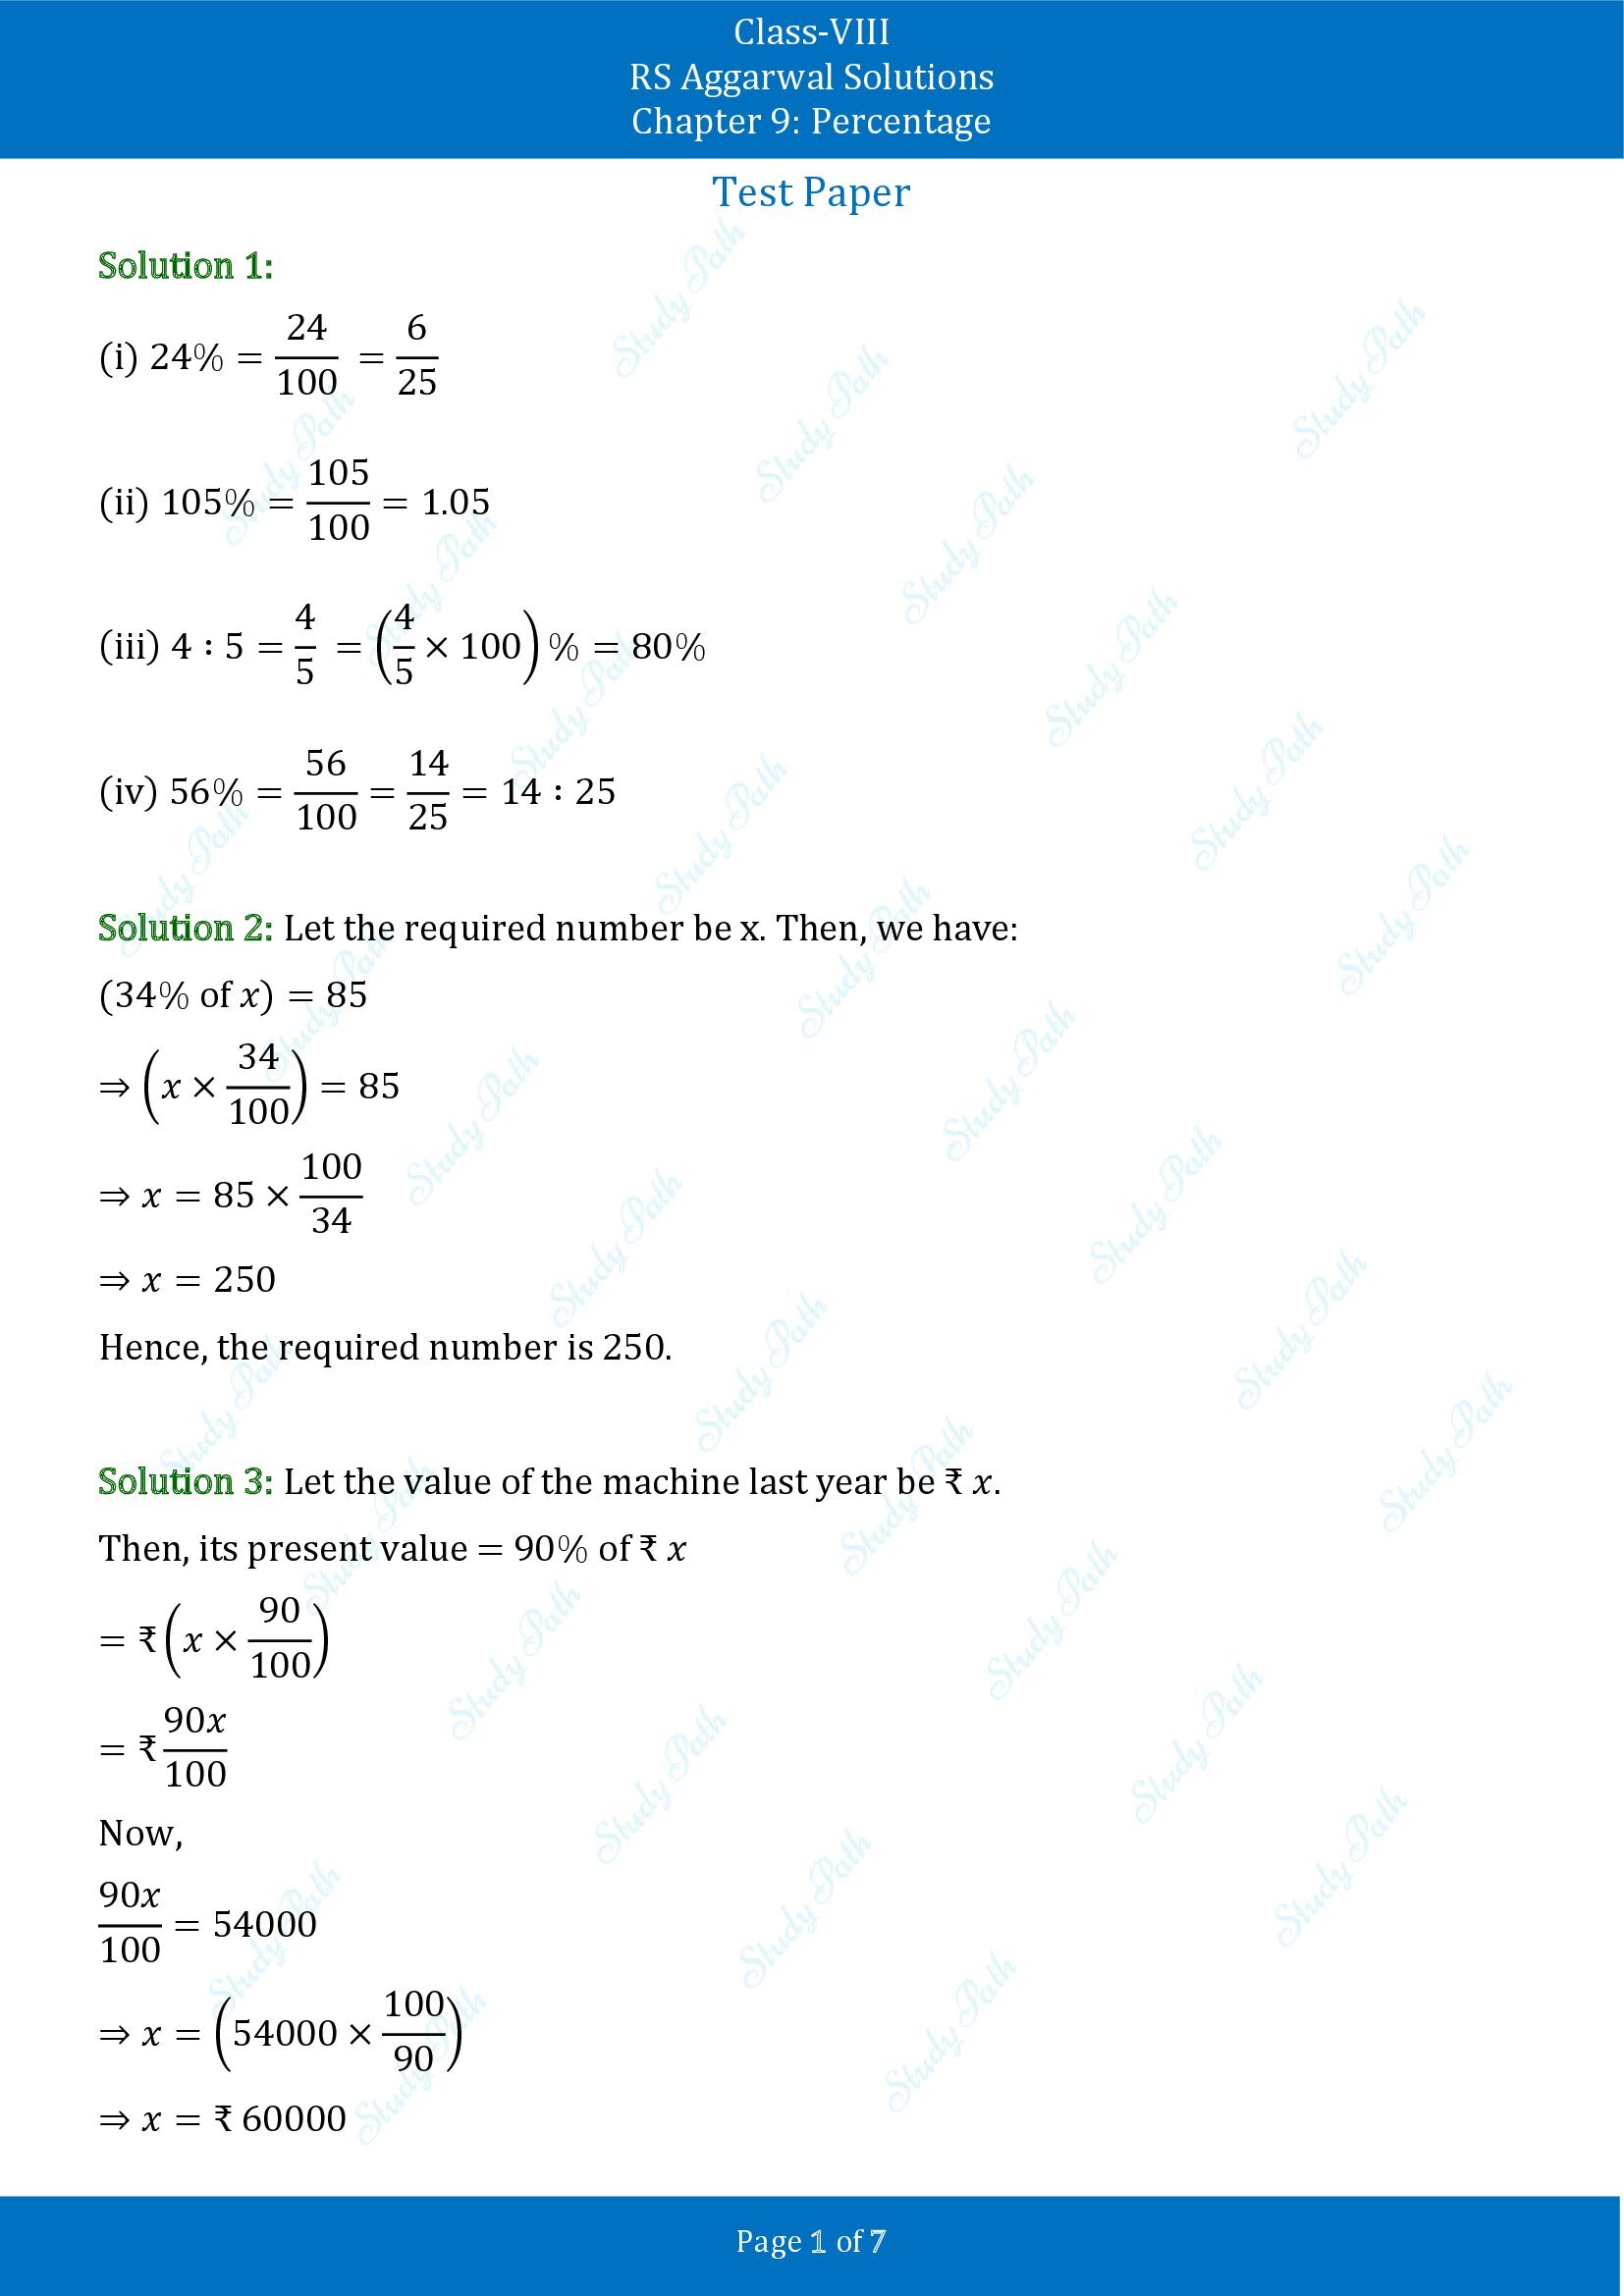 RS Aggarwal Solutions Class 8 Chapter 9 Percentage Test Paper 00001